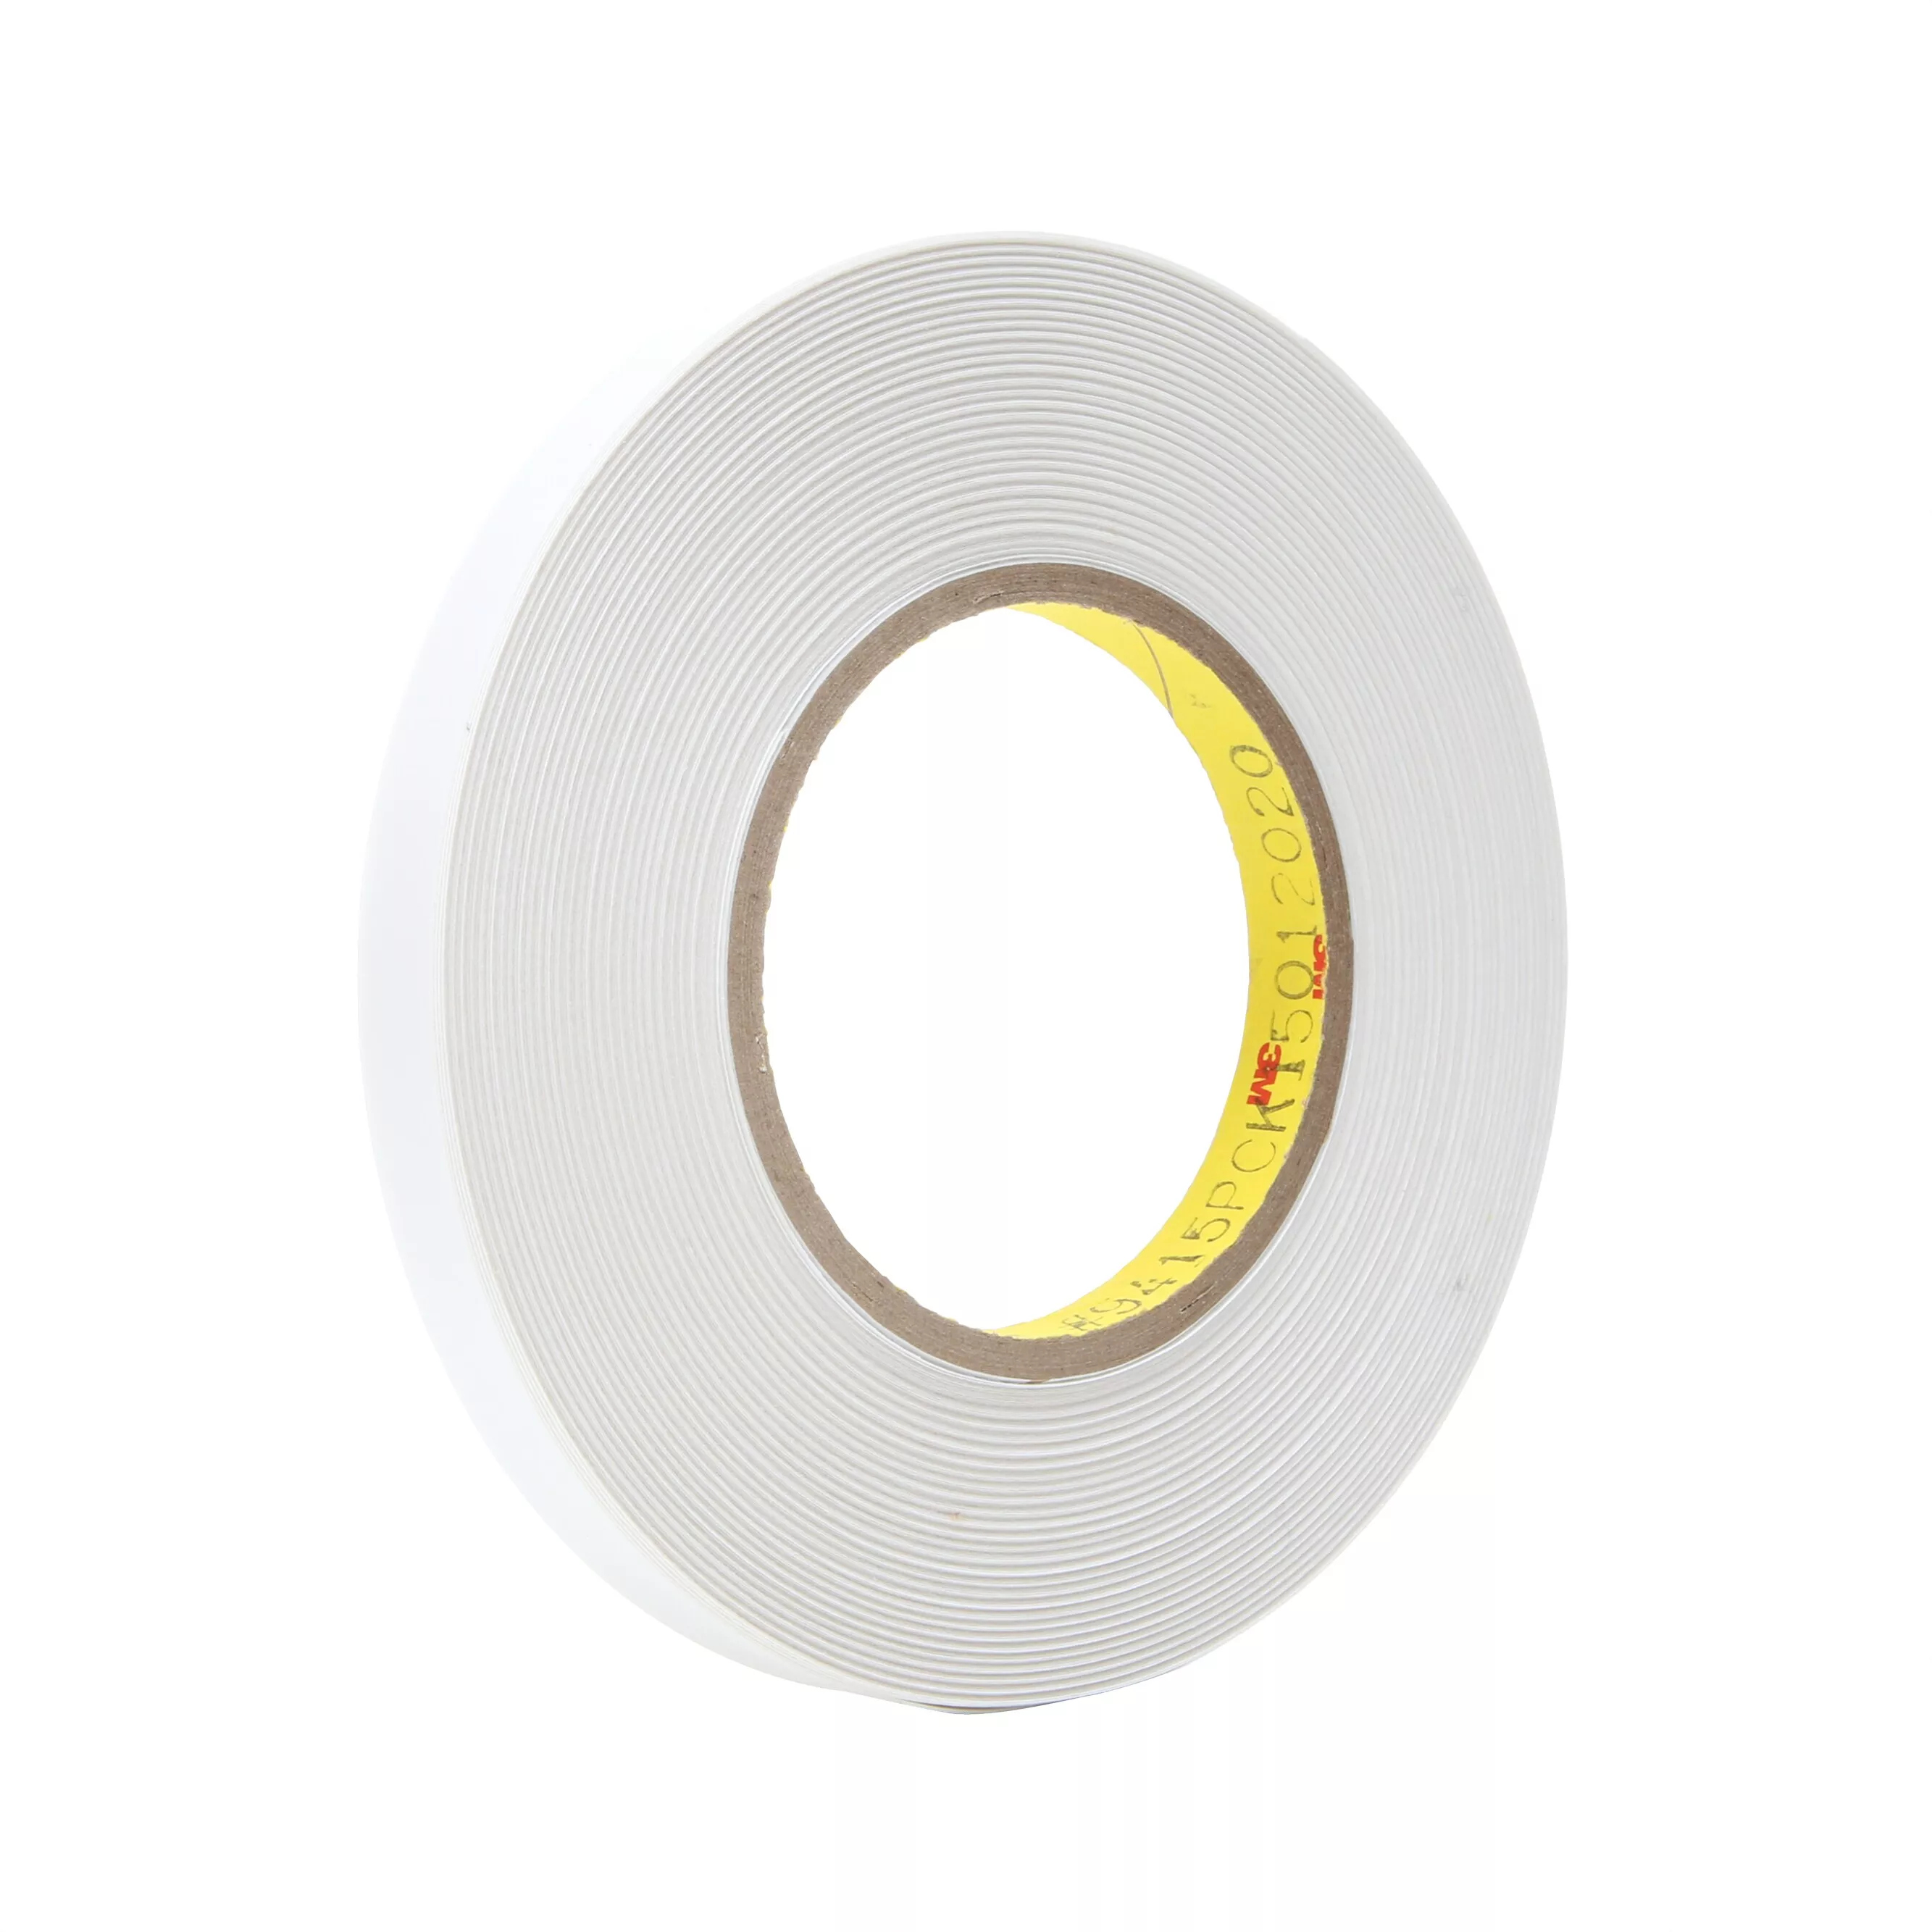 SKU 7100023338 | 3M™ Removable Repositionable Tape 9415PC